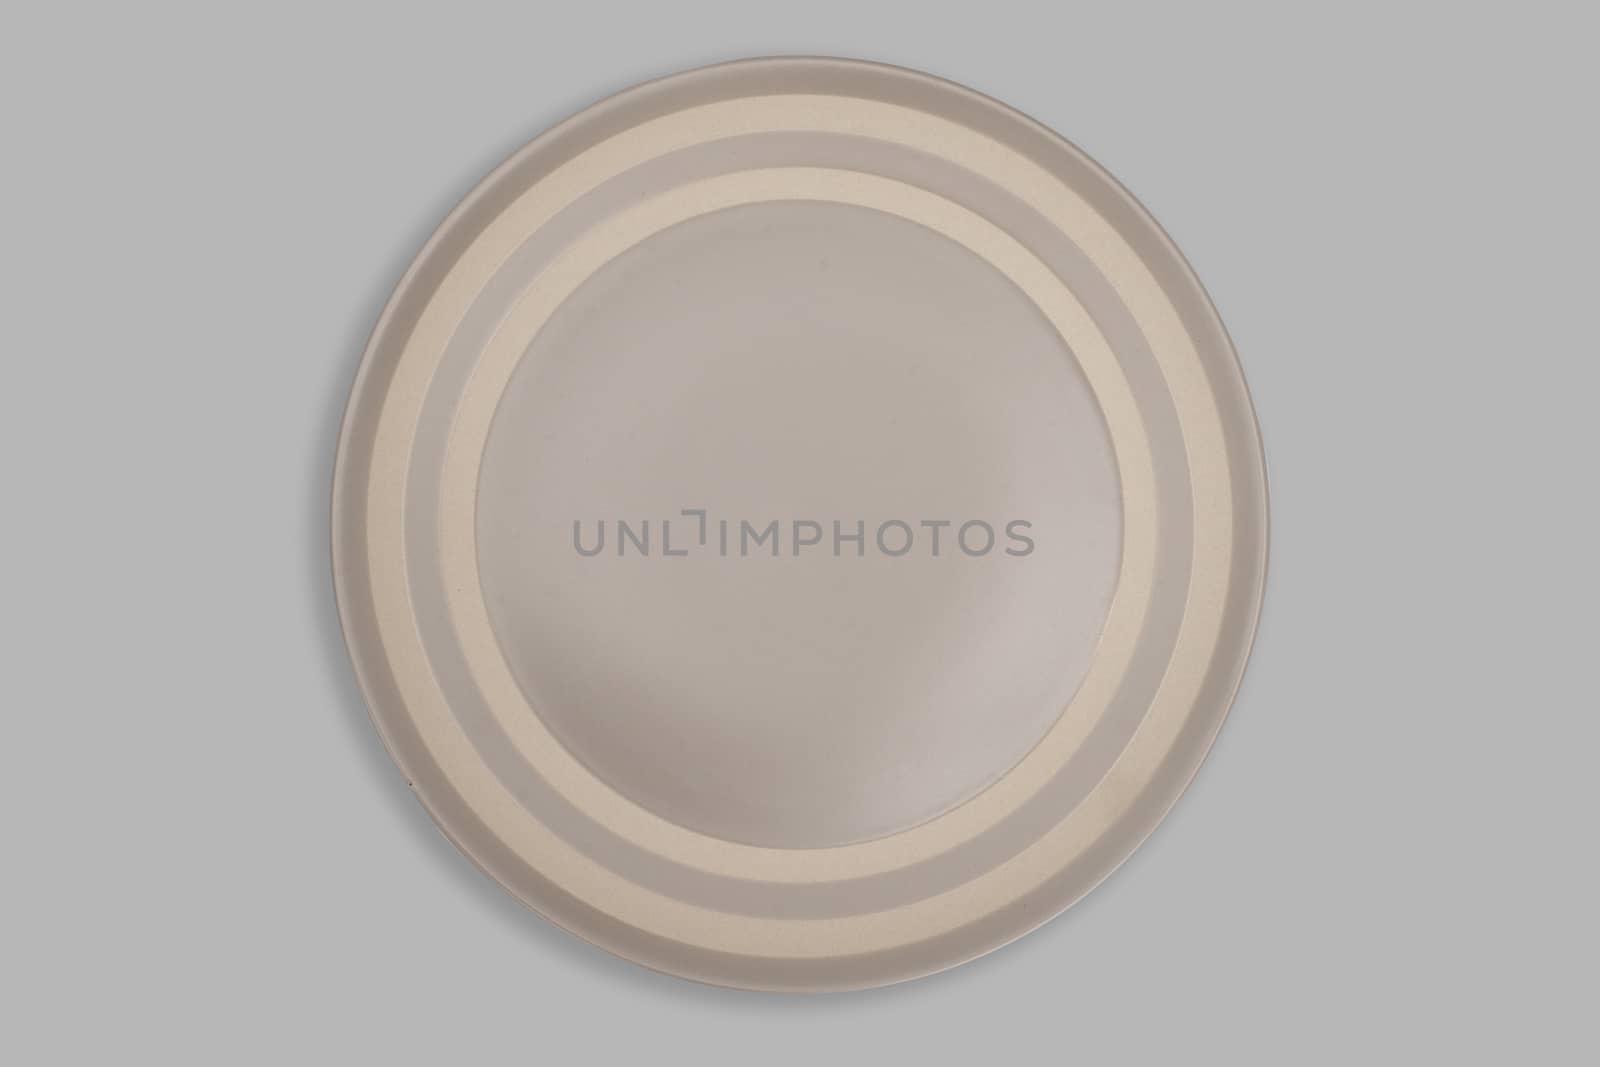 Top view-Empty brown ceeamic round dish plate isolated on grey background.